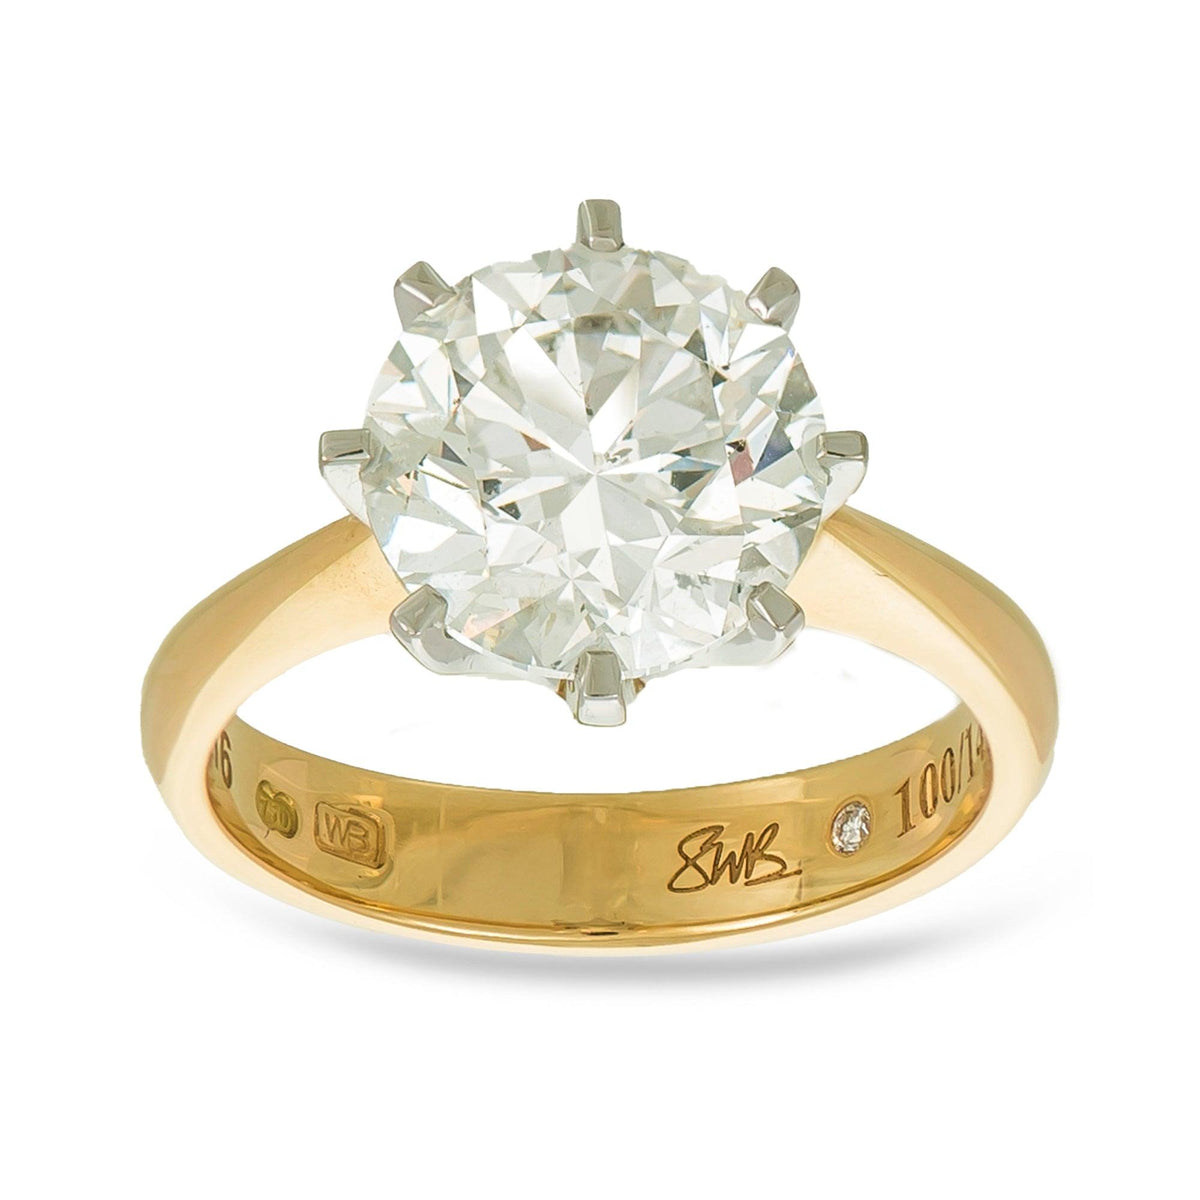 Round Brilliant Cut Diamond Ring in 18ct Yellow and White Gold - Wallace Bishop